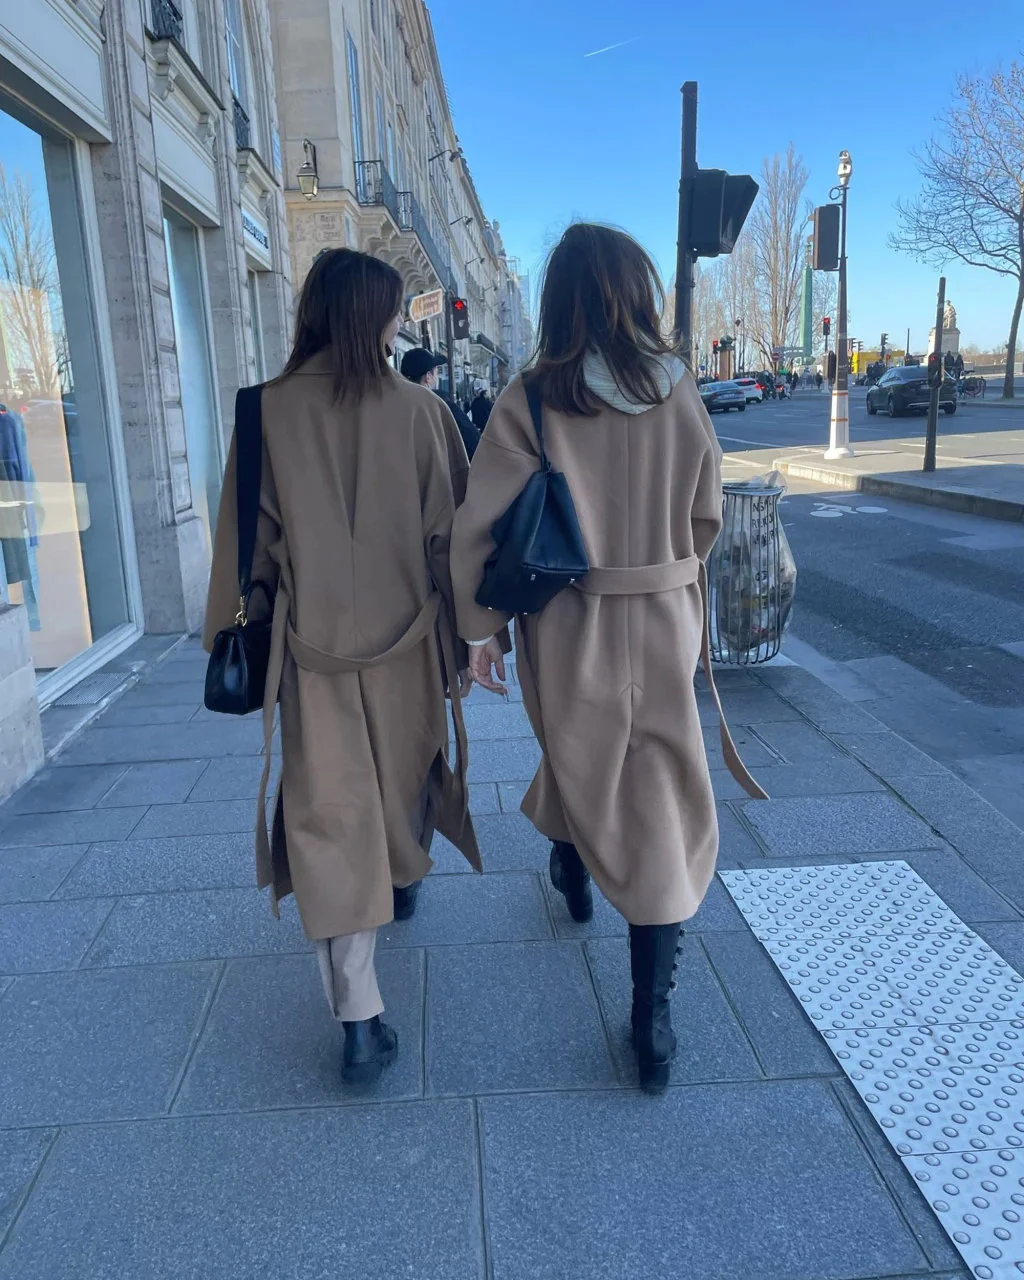 Cindy Crawford & Kaia Gerber mother and daughter recently in Paris Fashion Week ​​​